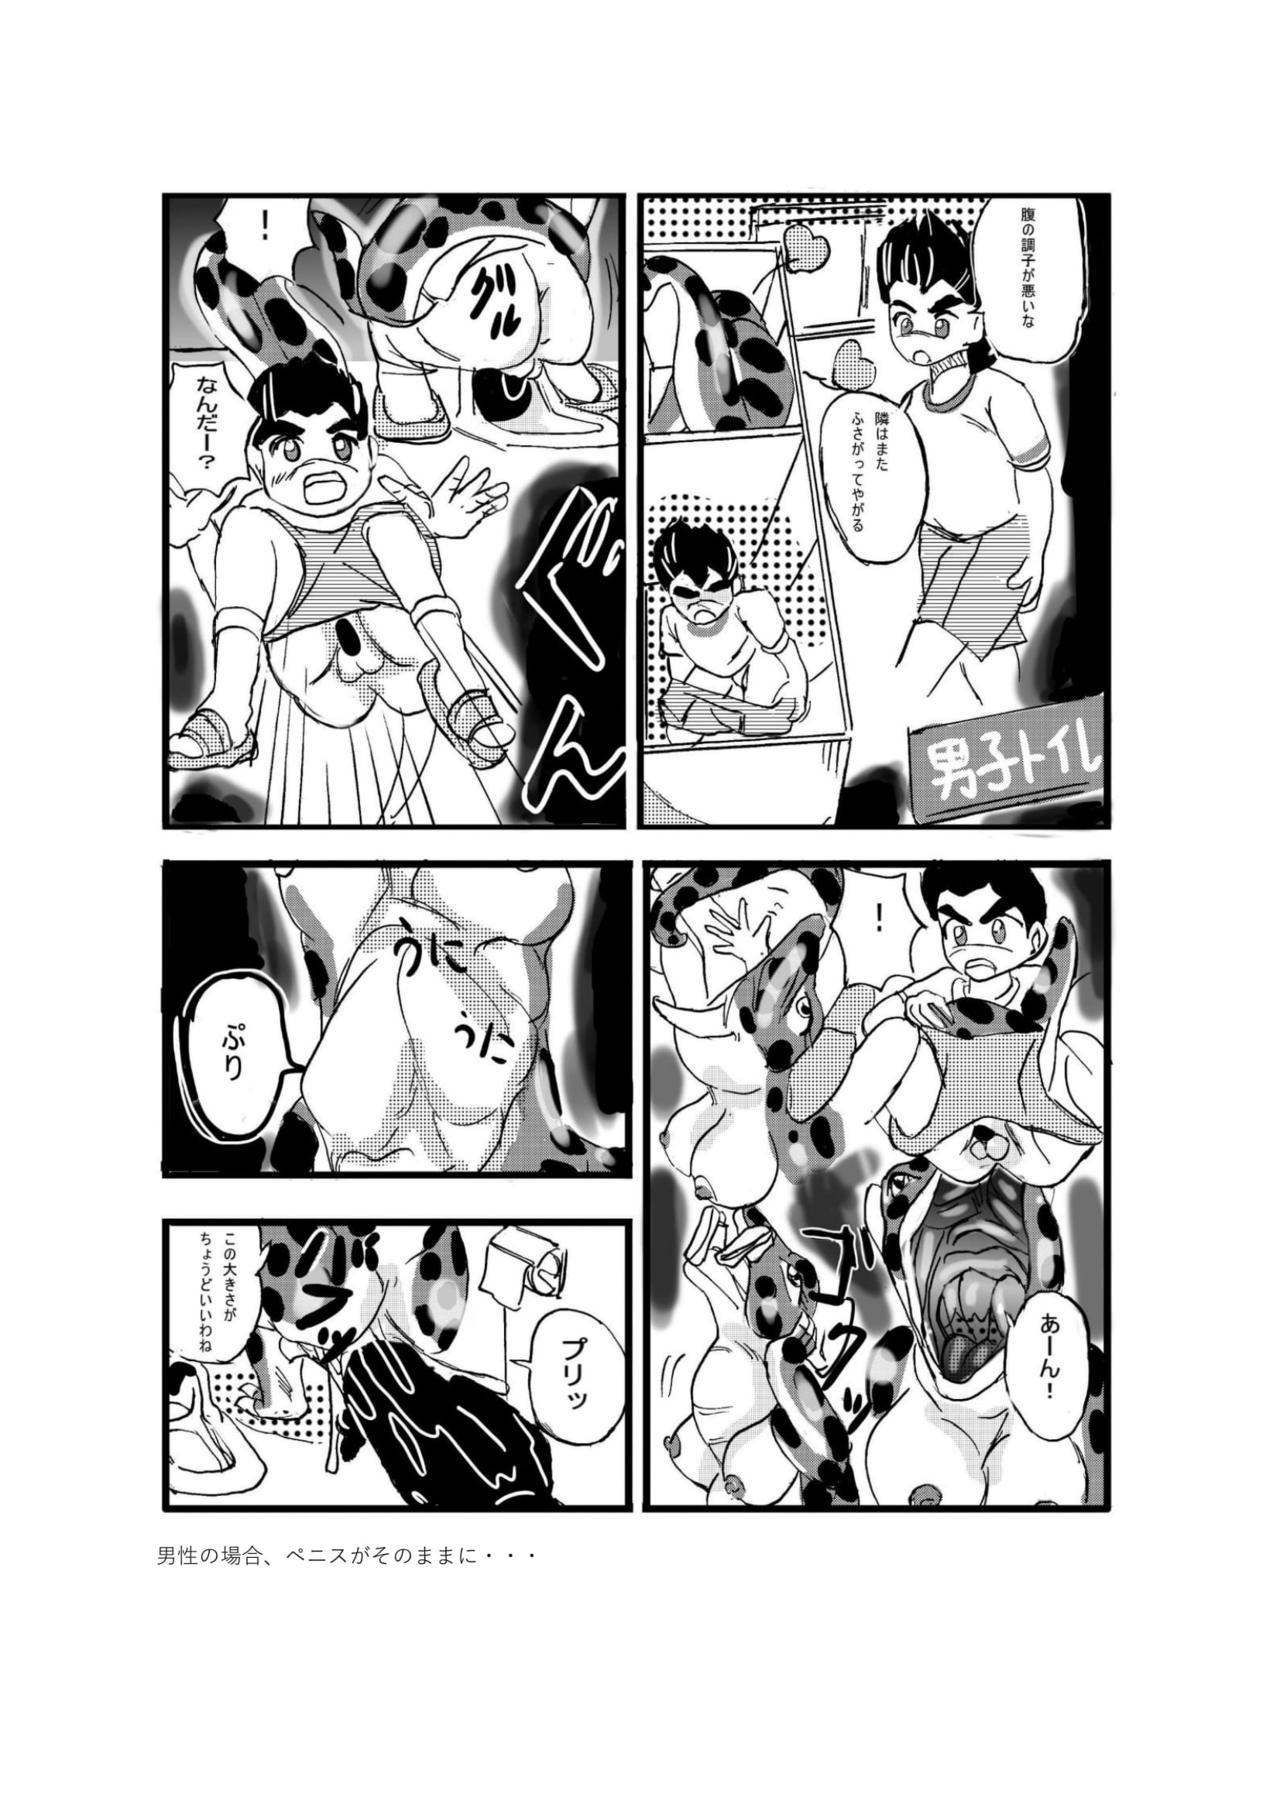 Facefuck Swallowed Whole vol.2 Waniko + What's Digestion? - Original Foursome - Page 2